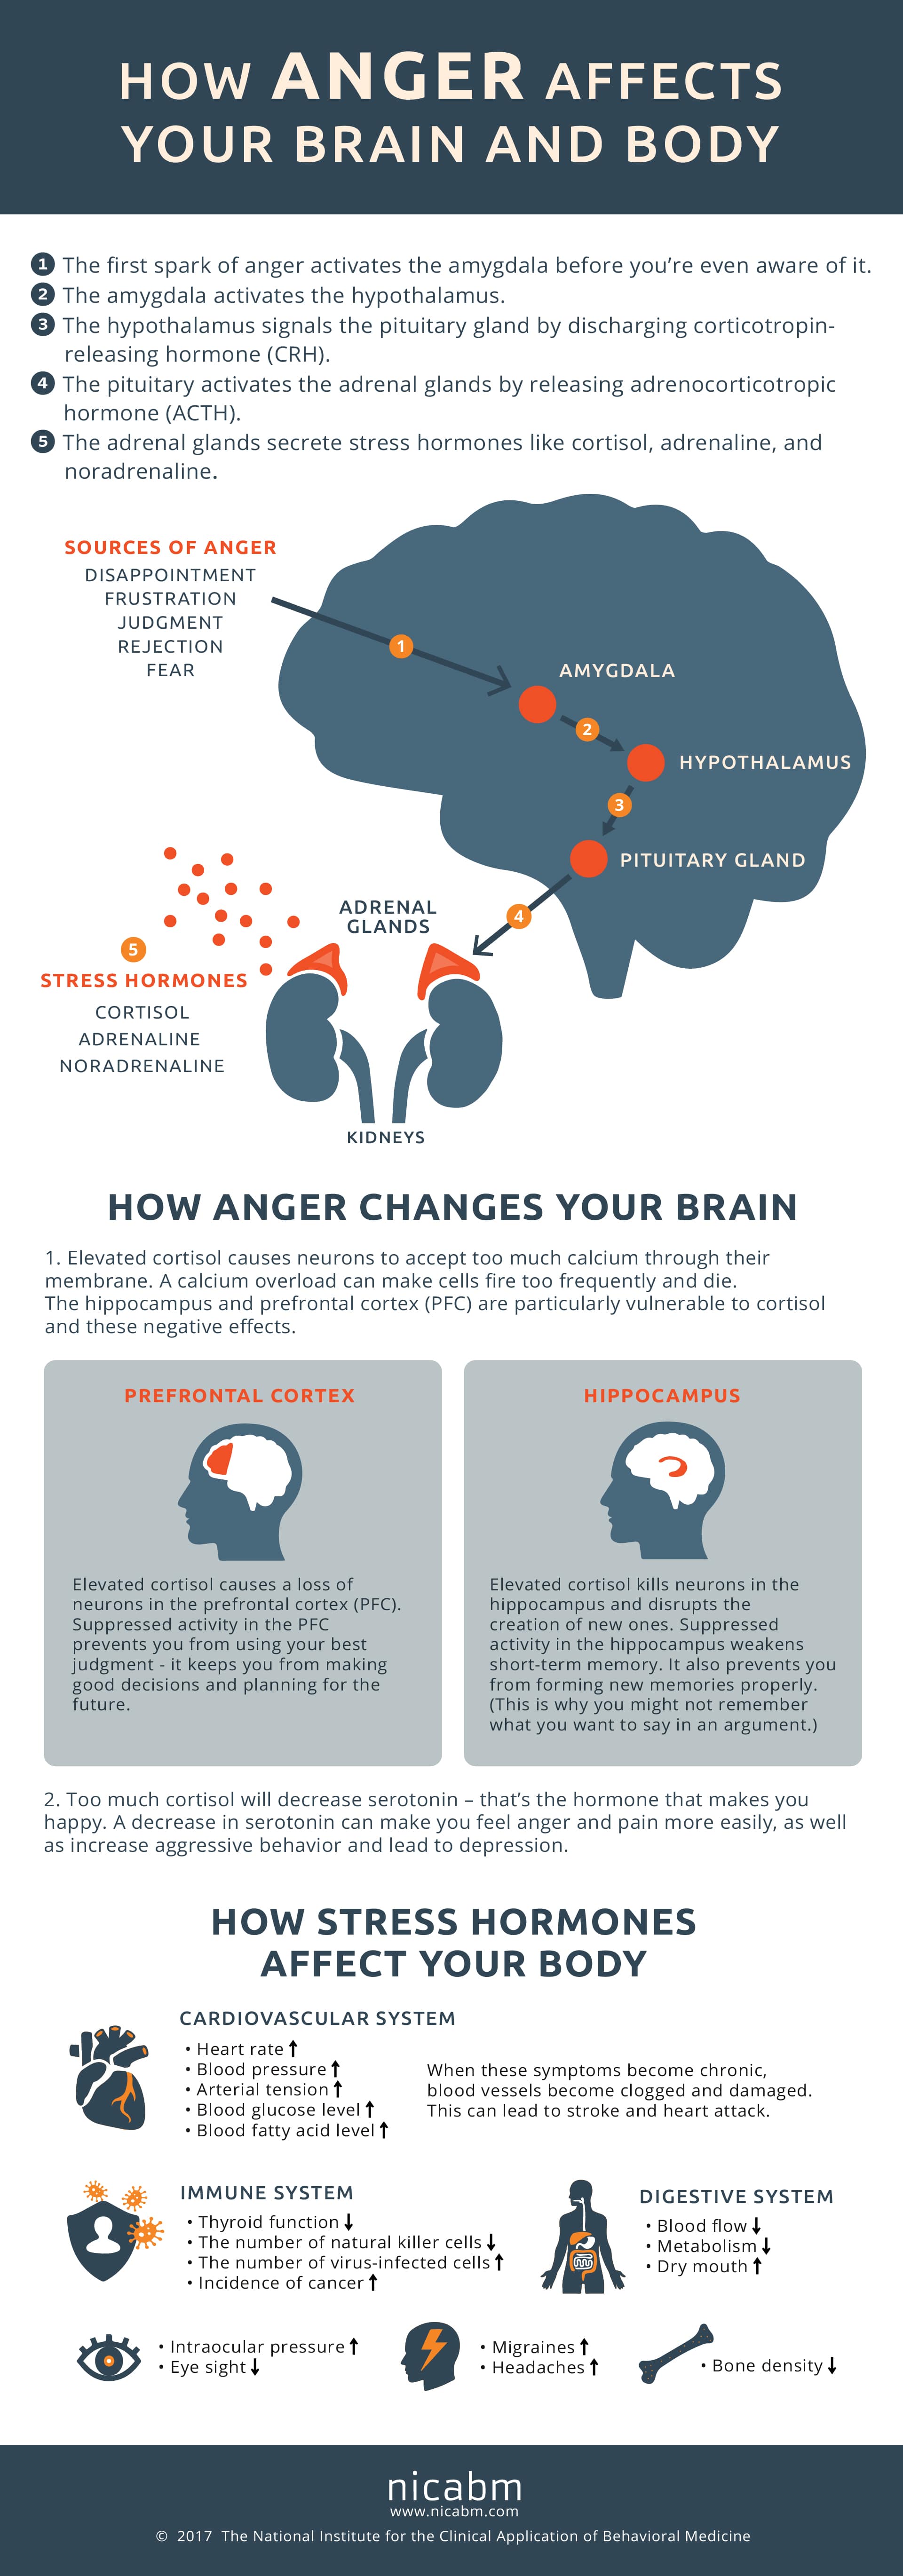 How Anger Affects the Brain and Body [Infographic] | The Personal ...